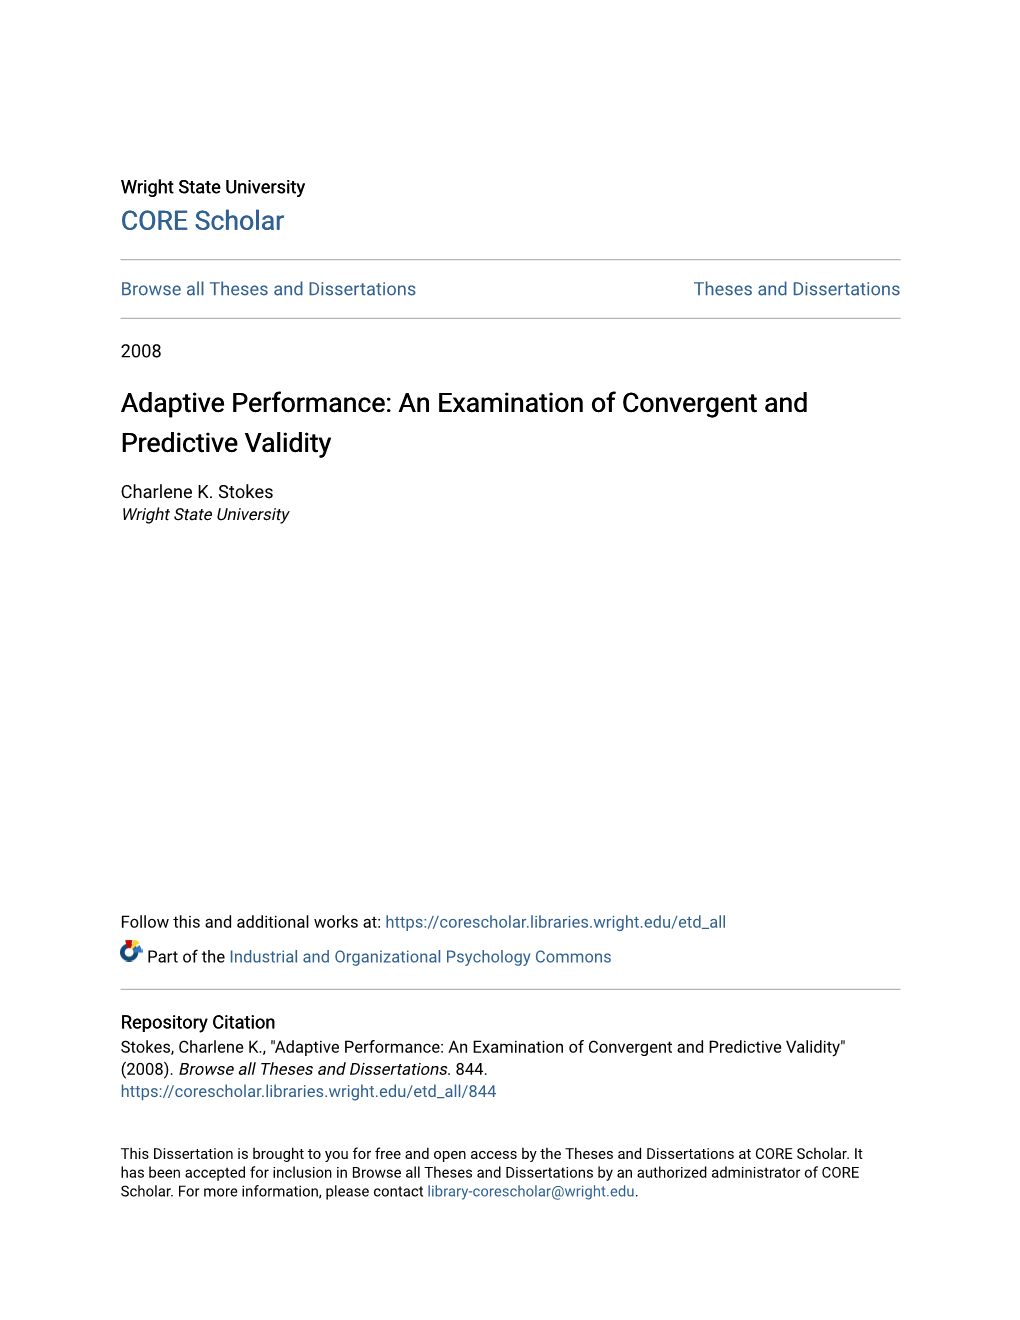 Adaptive Performance: an Examination of Convergent and Predictive Validity